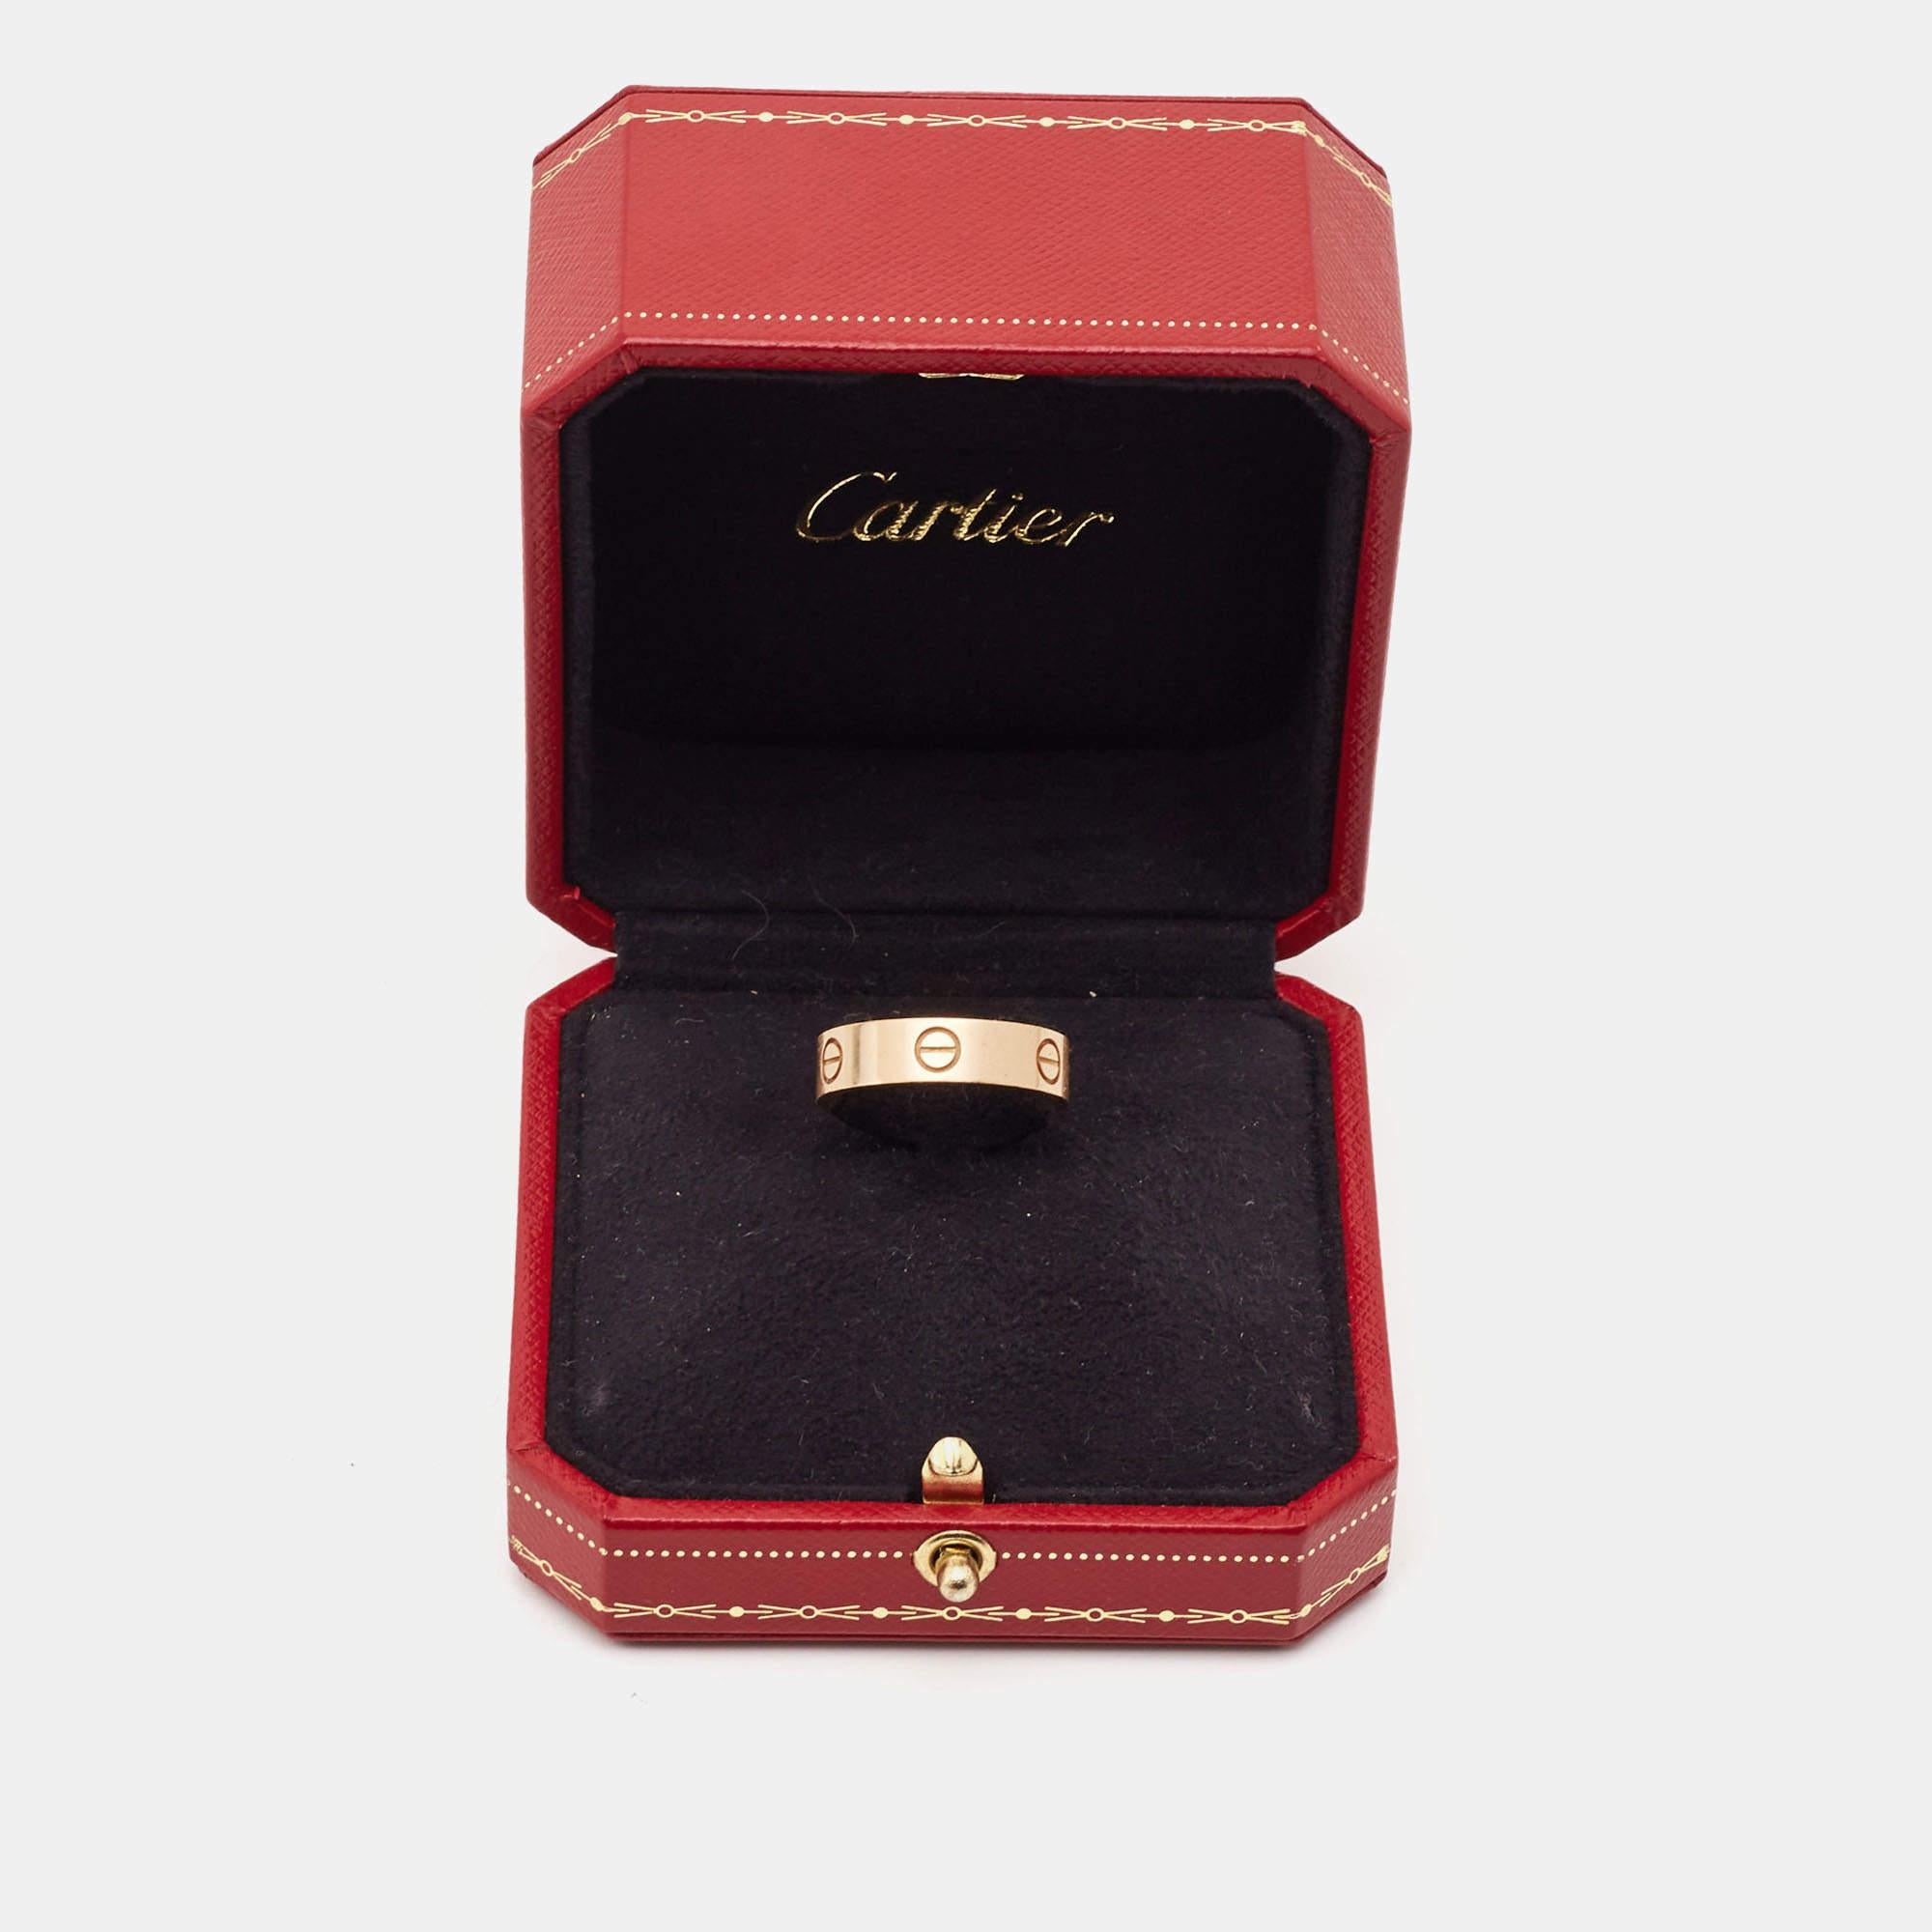 Cartier Love 18k Rose Gold Ring Size 59 3